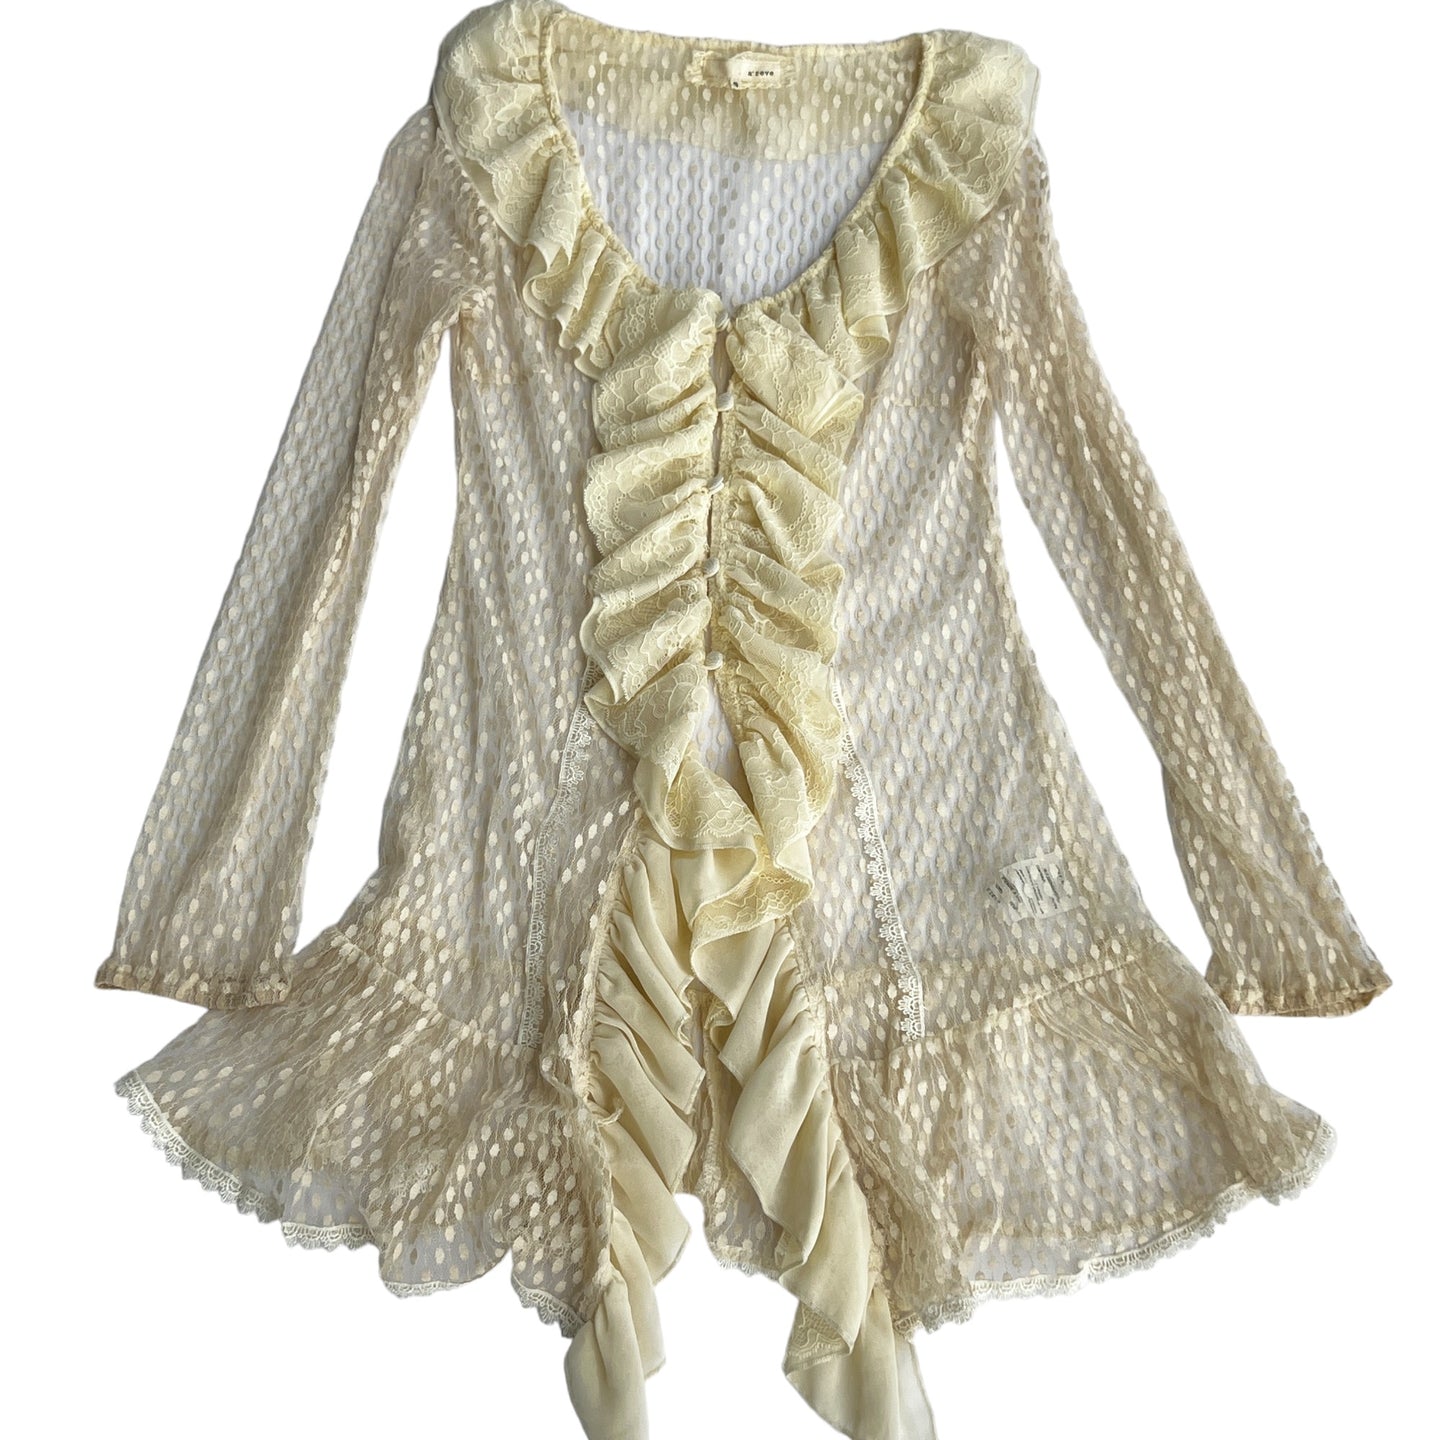 A'reve Anthropology Ruffled Lace Top Size Small 